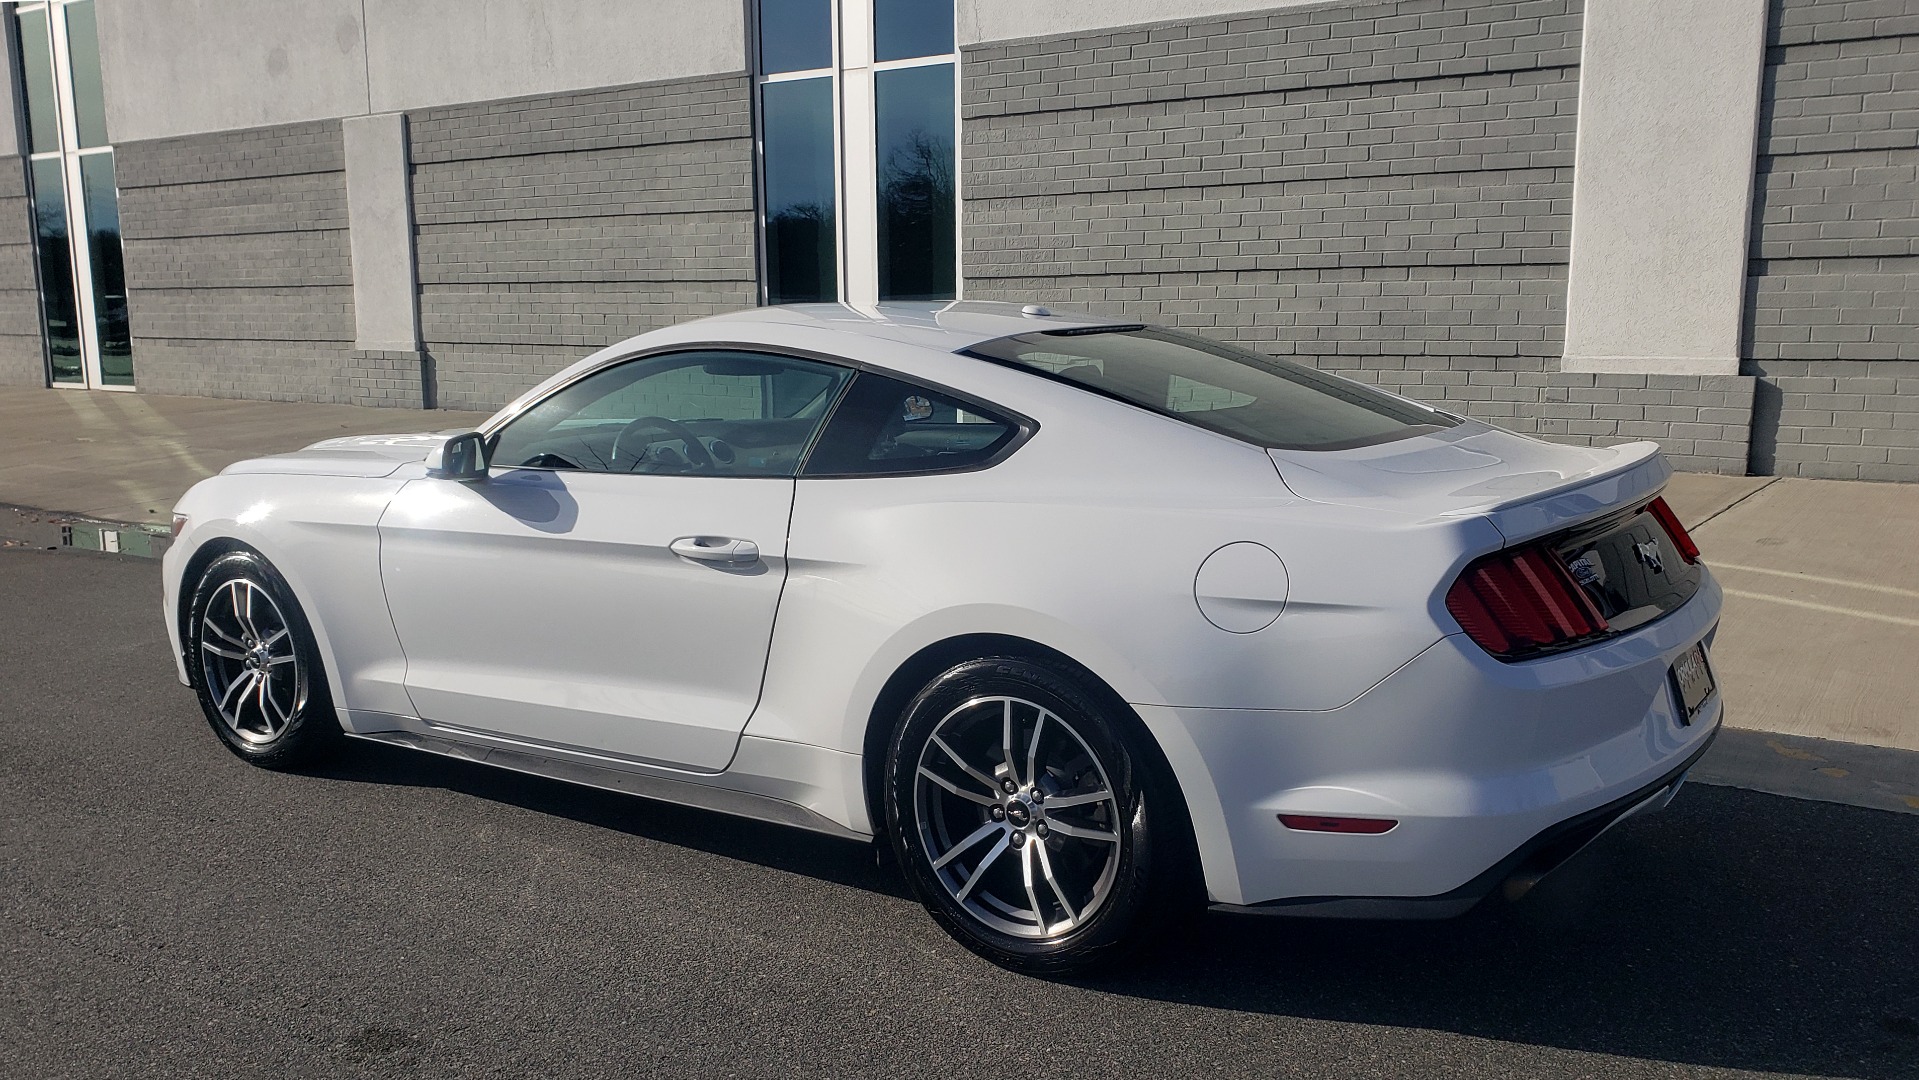 Used 2017 Ford MUSTANG PREMIUM COUPE 2.3L ECOBOOST / AUTO / 18-IN WHEELS / REARVIEW for sale Sold at Formula Imports in Charlotte NC 28227 5